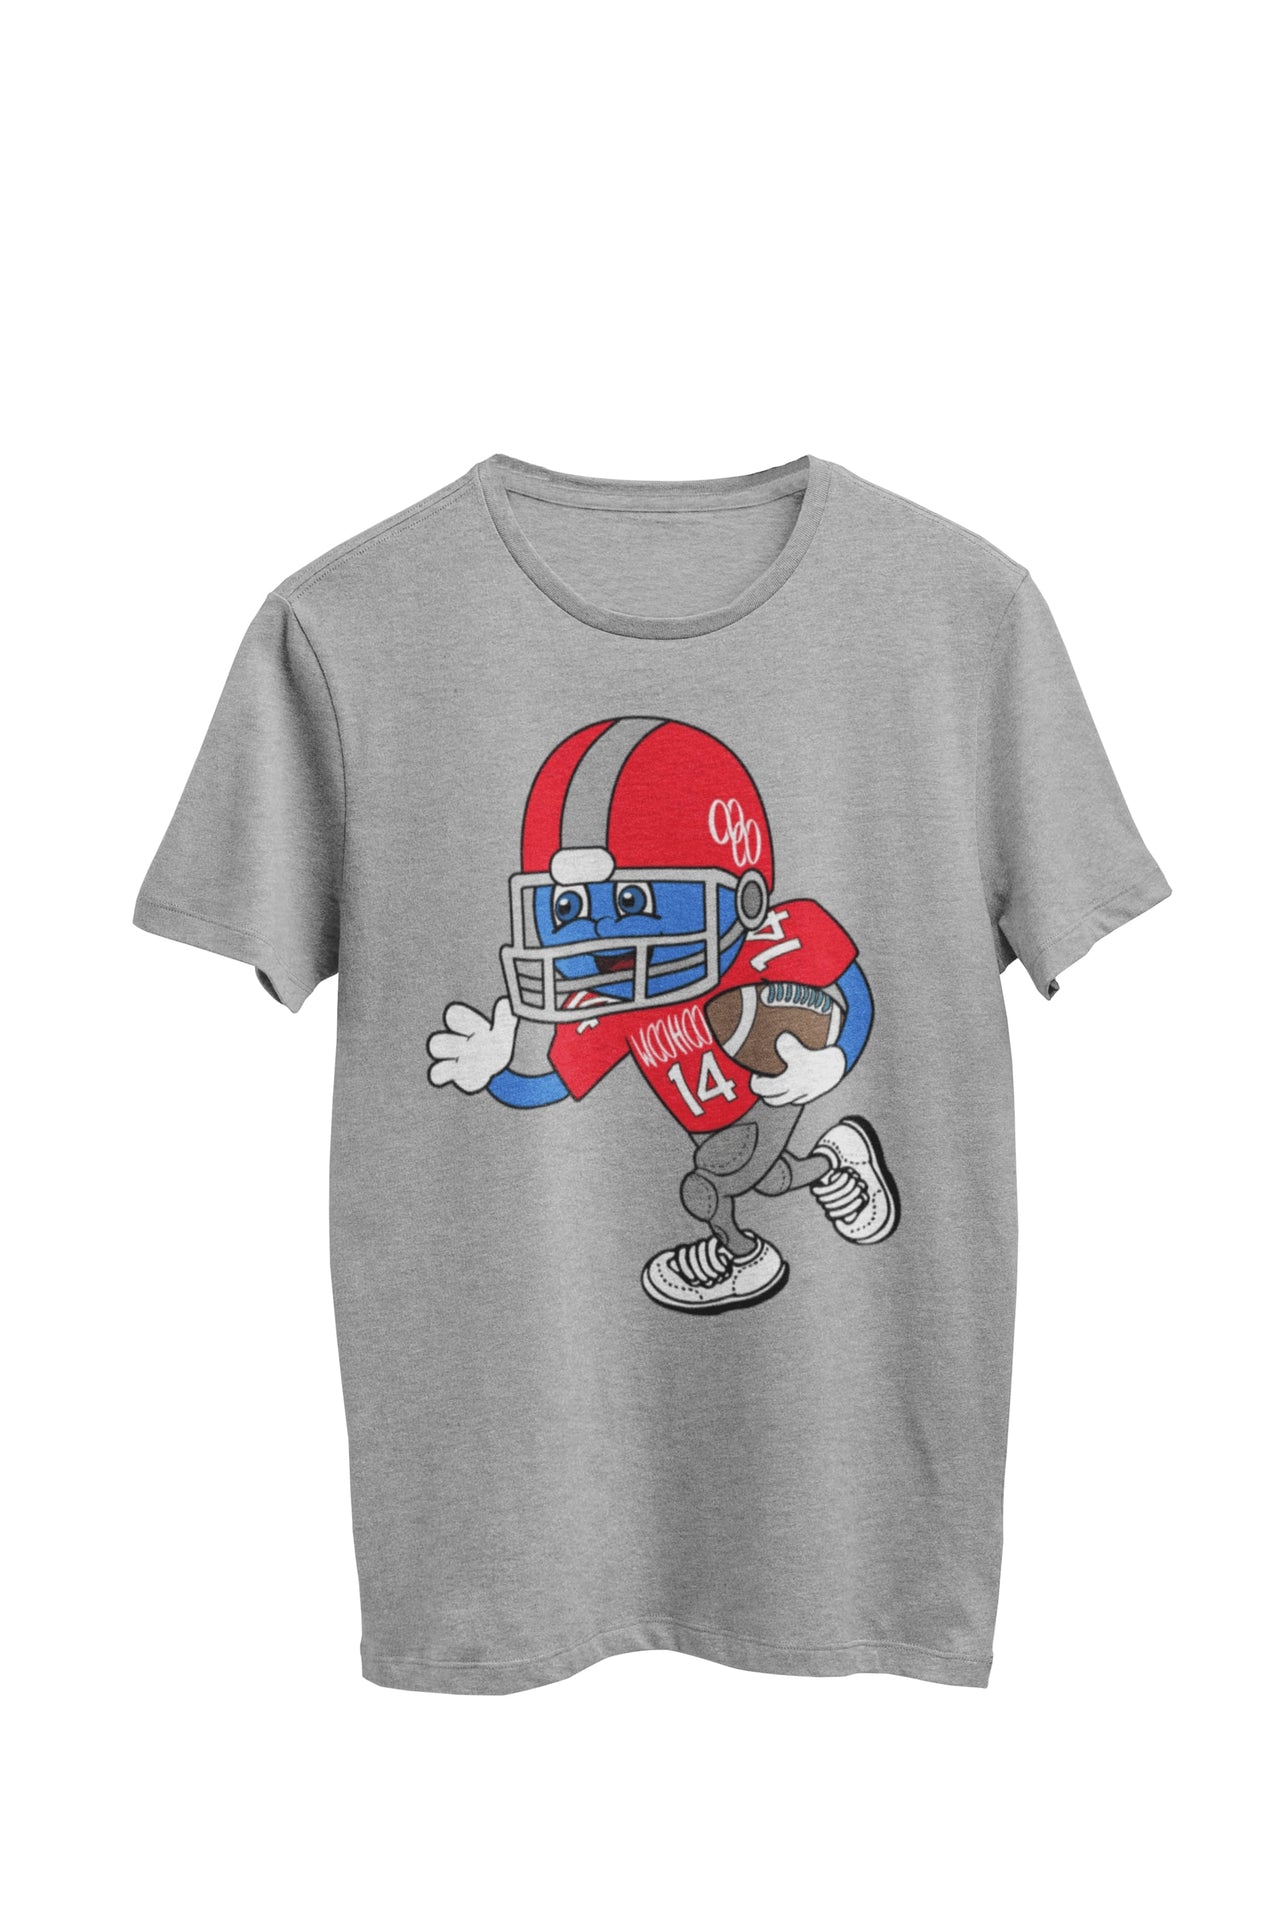 WooHooBerry dressed in a spirited red football uniform, sporting the number 14 for Team WooHoo. Their helmet proudly features the WooHoo Apparel logo. The gray T-shirt harmonizes with the energetic and team-spirited atmosphere.